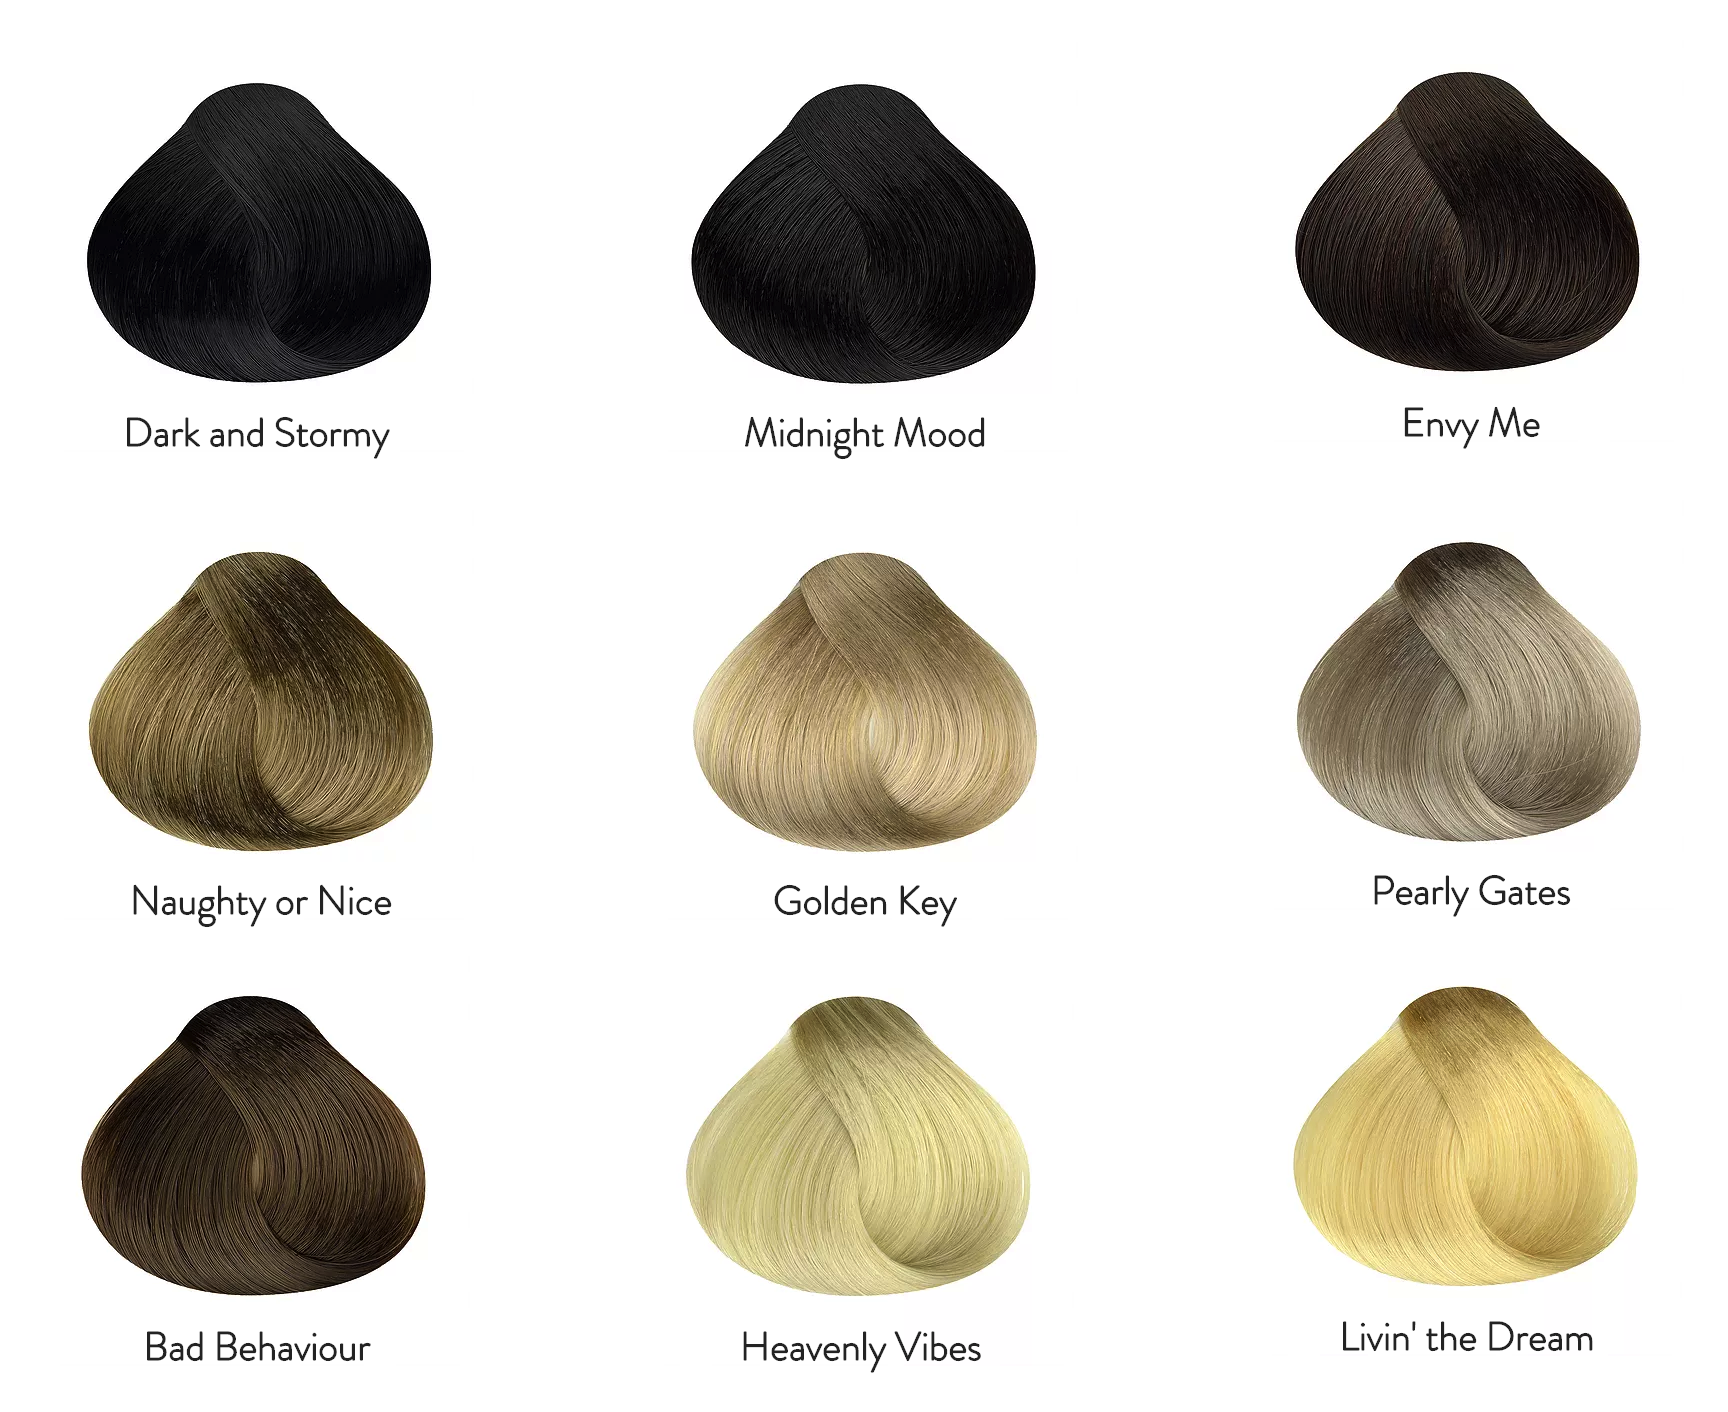 Our hair extension colors